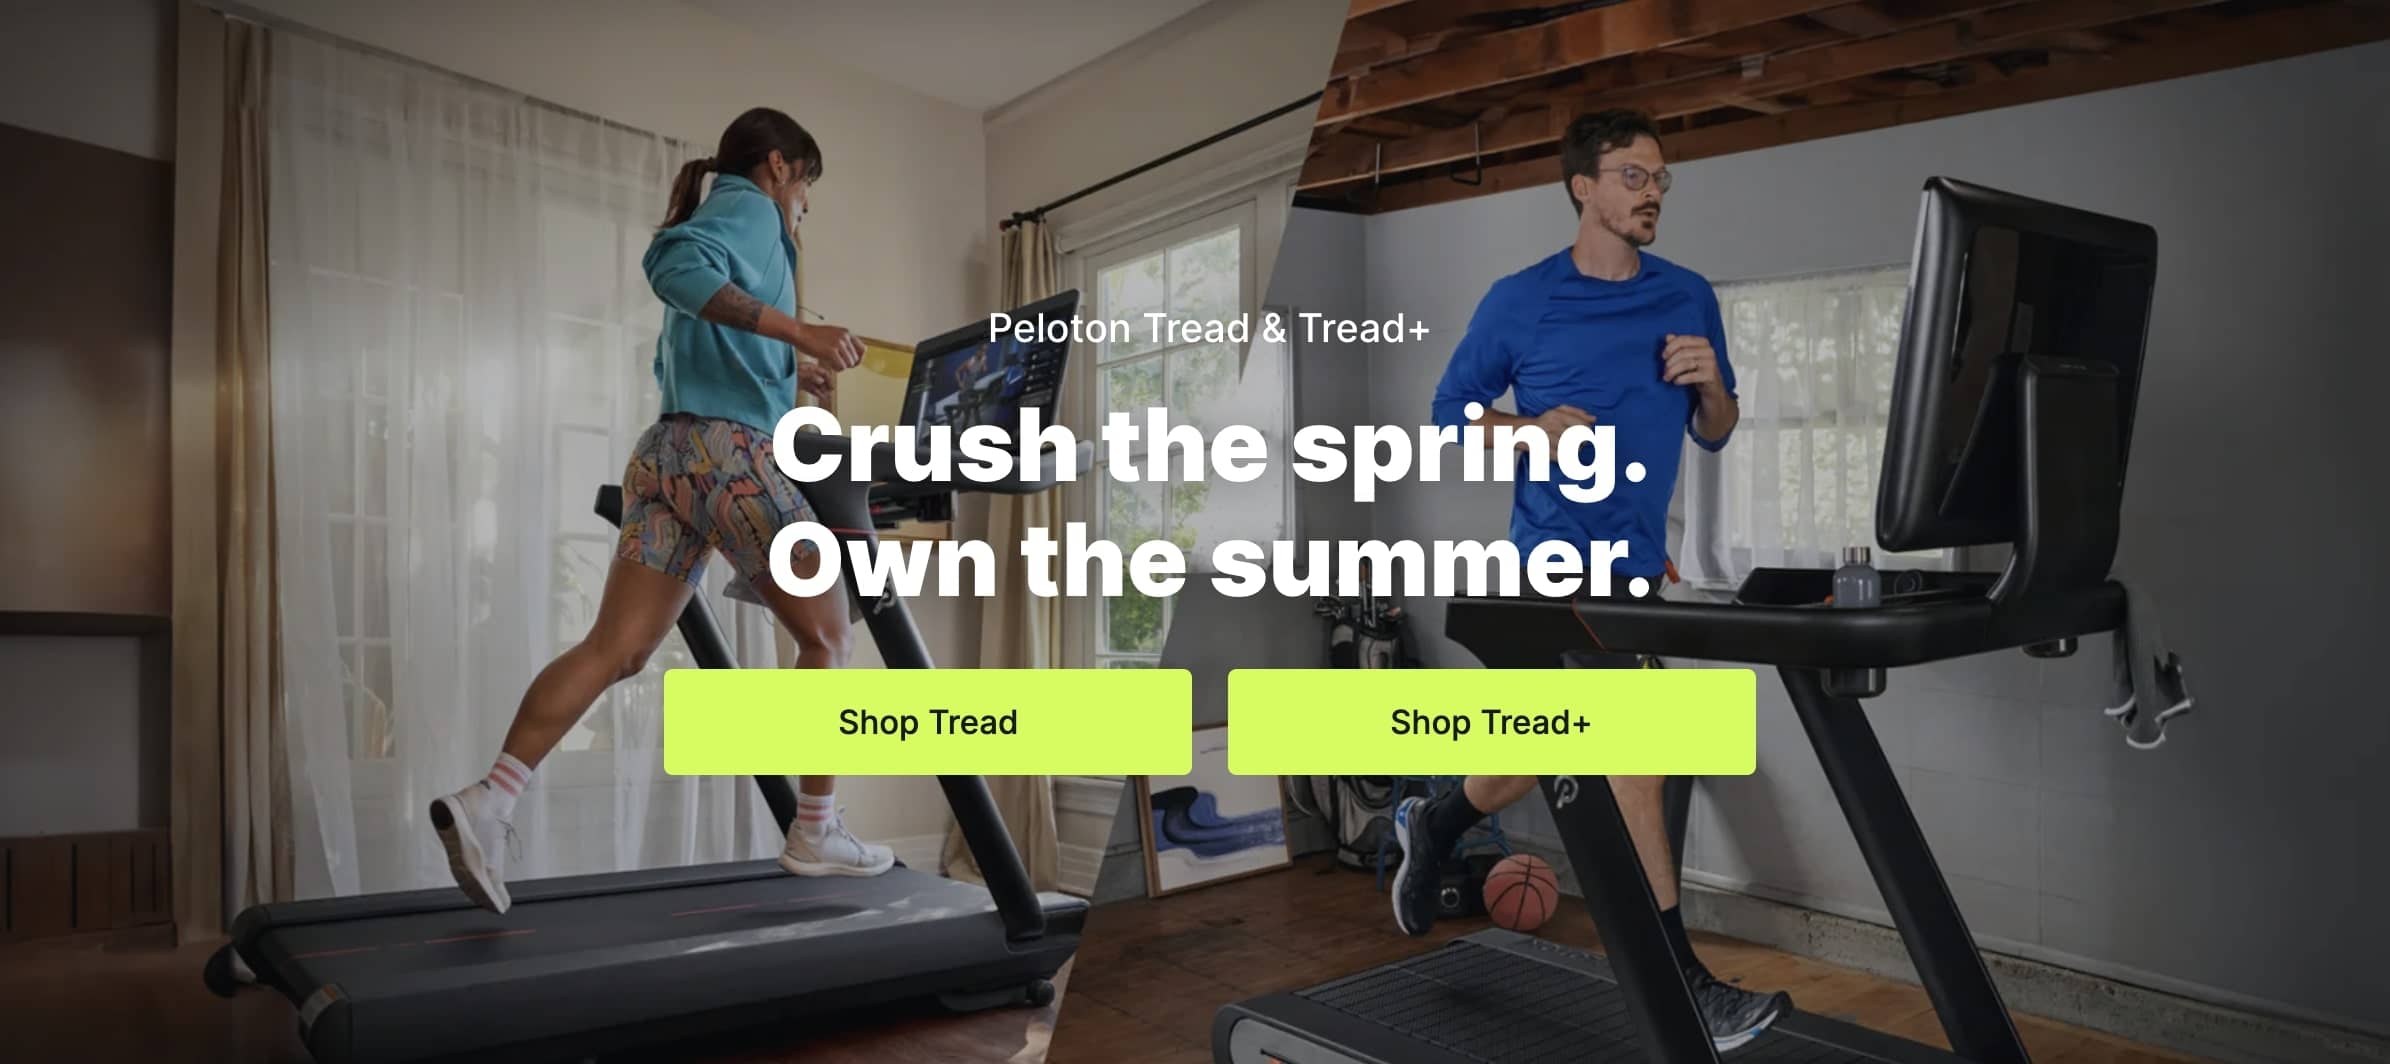 A woman and a man run on treadmills in separate rooms. Text overlay reads "Crush the spring. Own the summer with 2024's latest fitness technology." There are buttons for "Shop Tread" and "Shop Tread+" below the text.